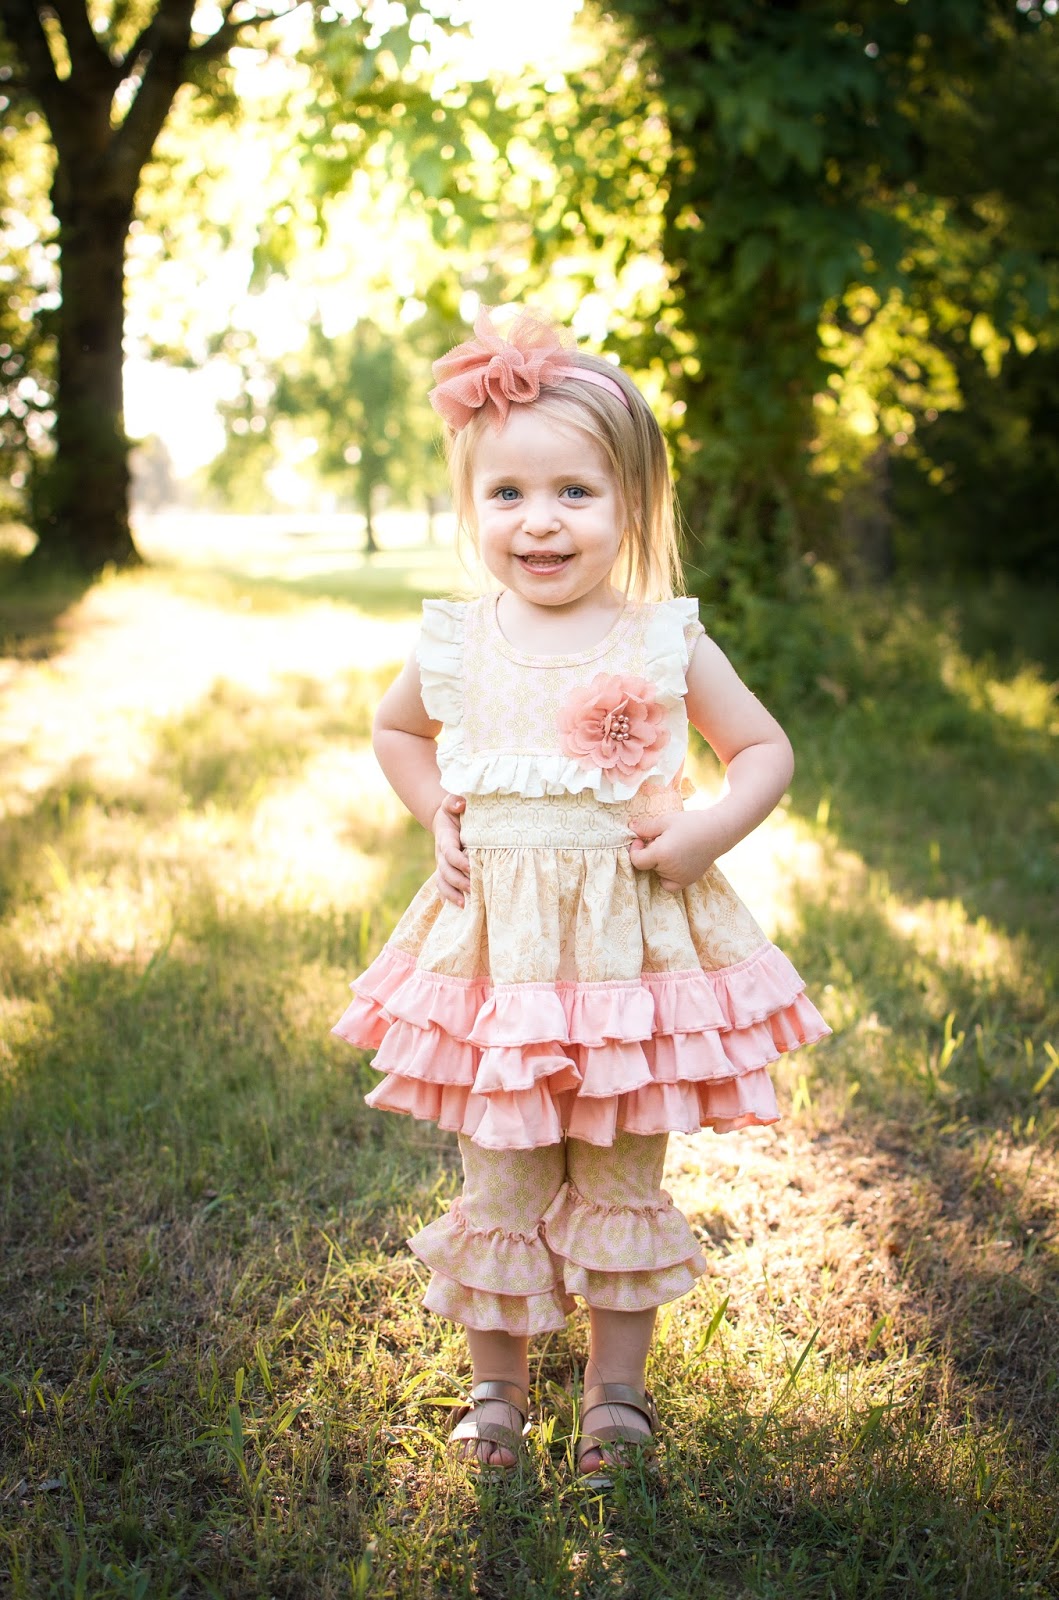 Brittney Owens Photography: Duda Family Session {Fort Smith Photographer}